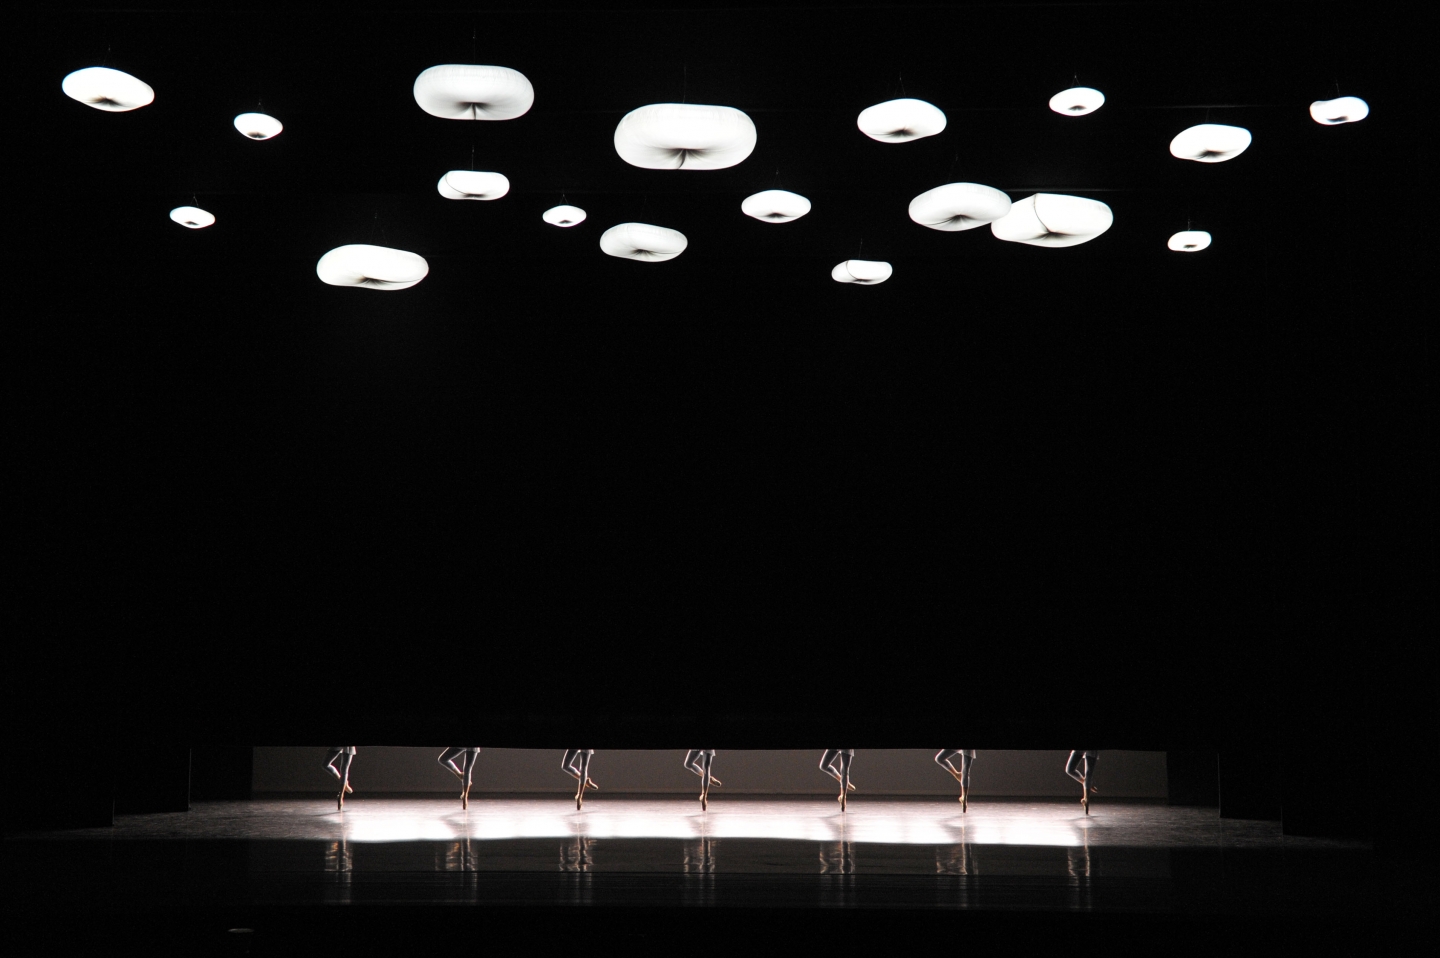 molo cloud pendant lighting for Escaping the Weight of Darkness choreographed by Jessica Lang and performed by the National Ballet of Japan